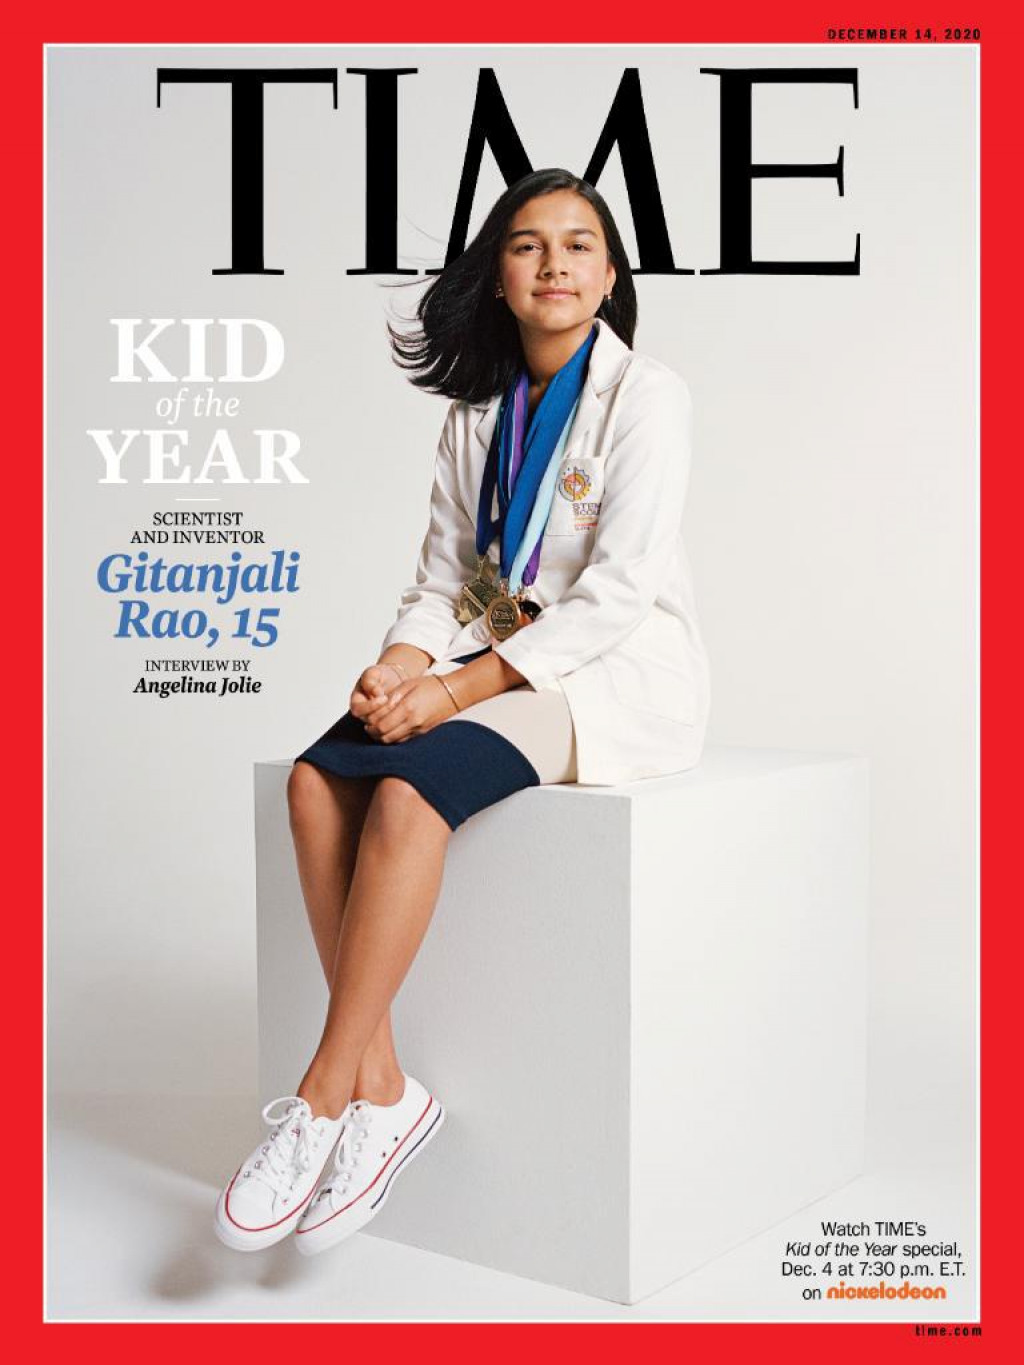 New image released by Rosario Dawson on Twitter with the following caption: RT @TIME: Introducing the first-ever Kid of the Year, Gitanjali Rao https://t.co/Hvgu3GLoNs https://t.co/4zORbRiGMU *** No USA Distribution *** For Editorial Use Only *** Not to be Published in Books or Photo Books ***&lt;br /&gt;
Please note: Fees charged by the agency are for the agency’s services only, and do not, nor are they intended to, convey to the user any ownership of Copyright or License in the material. The agency does not claim any ownership including but not limited to Copyright or License in the attached material. By publishing this material you expressly agree to indemnify and to hold the agency and its directors, shareholders and employees harmless from any loss, claims, damages, demands, expenses (including legal fees), or any causes of action or allegation against the agency arising out of or connected in any way with publication of the material.,Image: 573867527, License: Rights-managed, Restrictions: *** No USA Distribution *** For Editorial Use Only *** Not to be Published in Books or Photo Books *** Handling Fee Only ***, Model Release: no, Credit line: Twitter/ddp USA/Profimedia